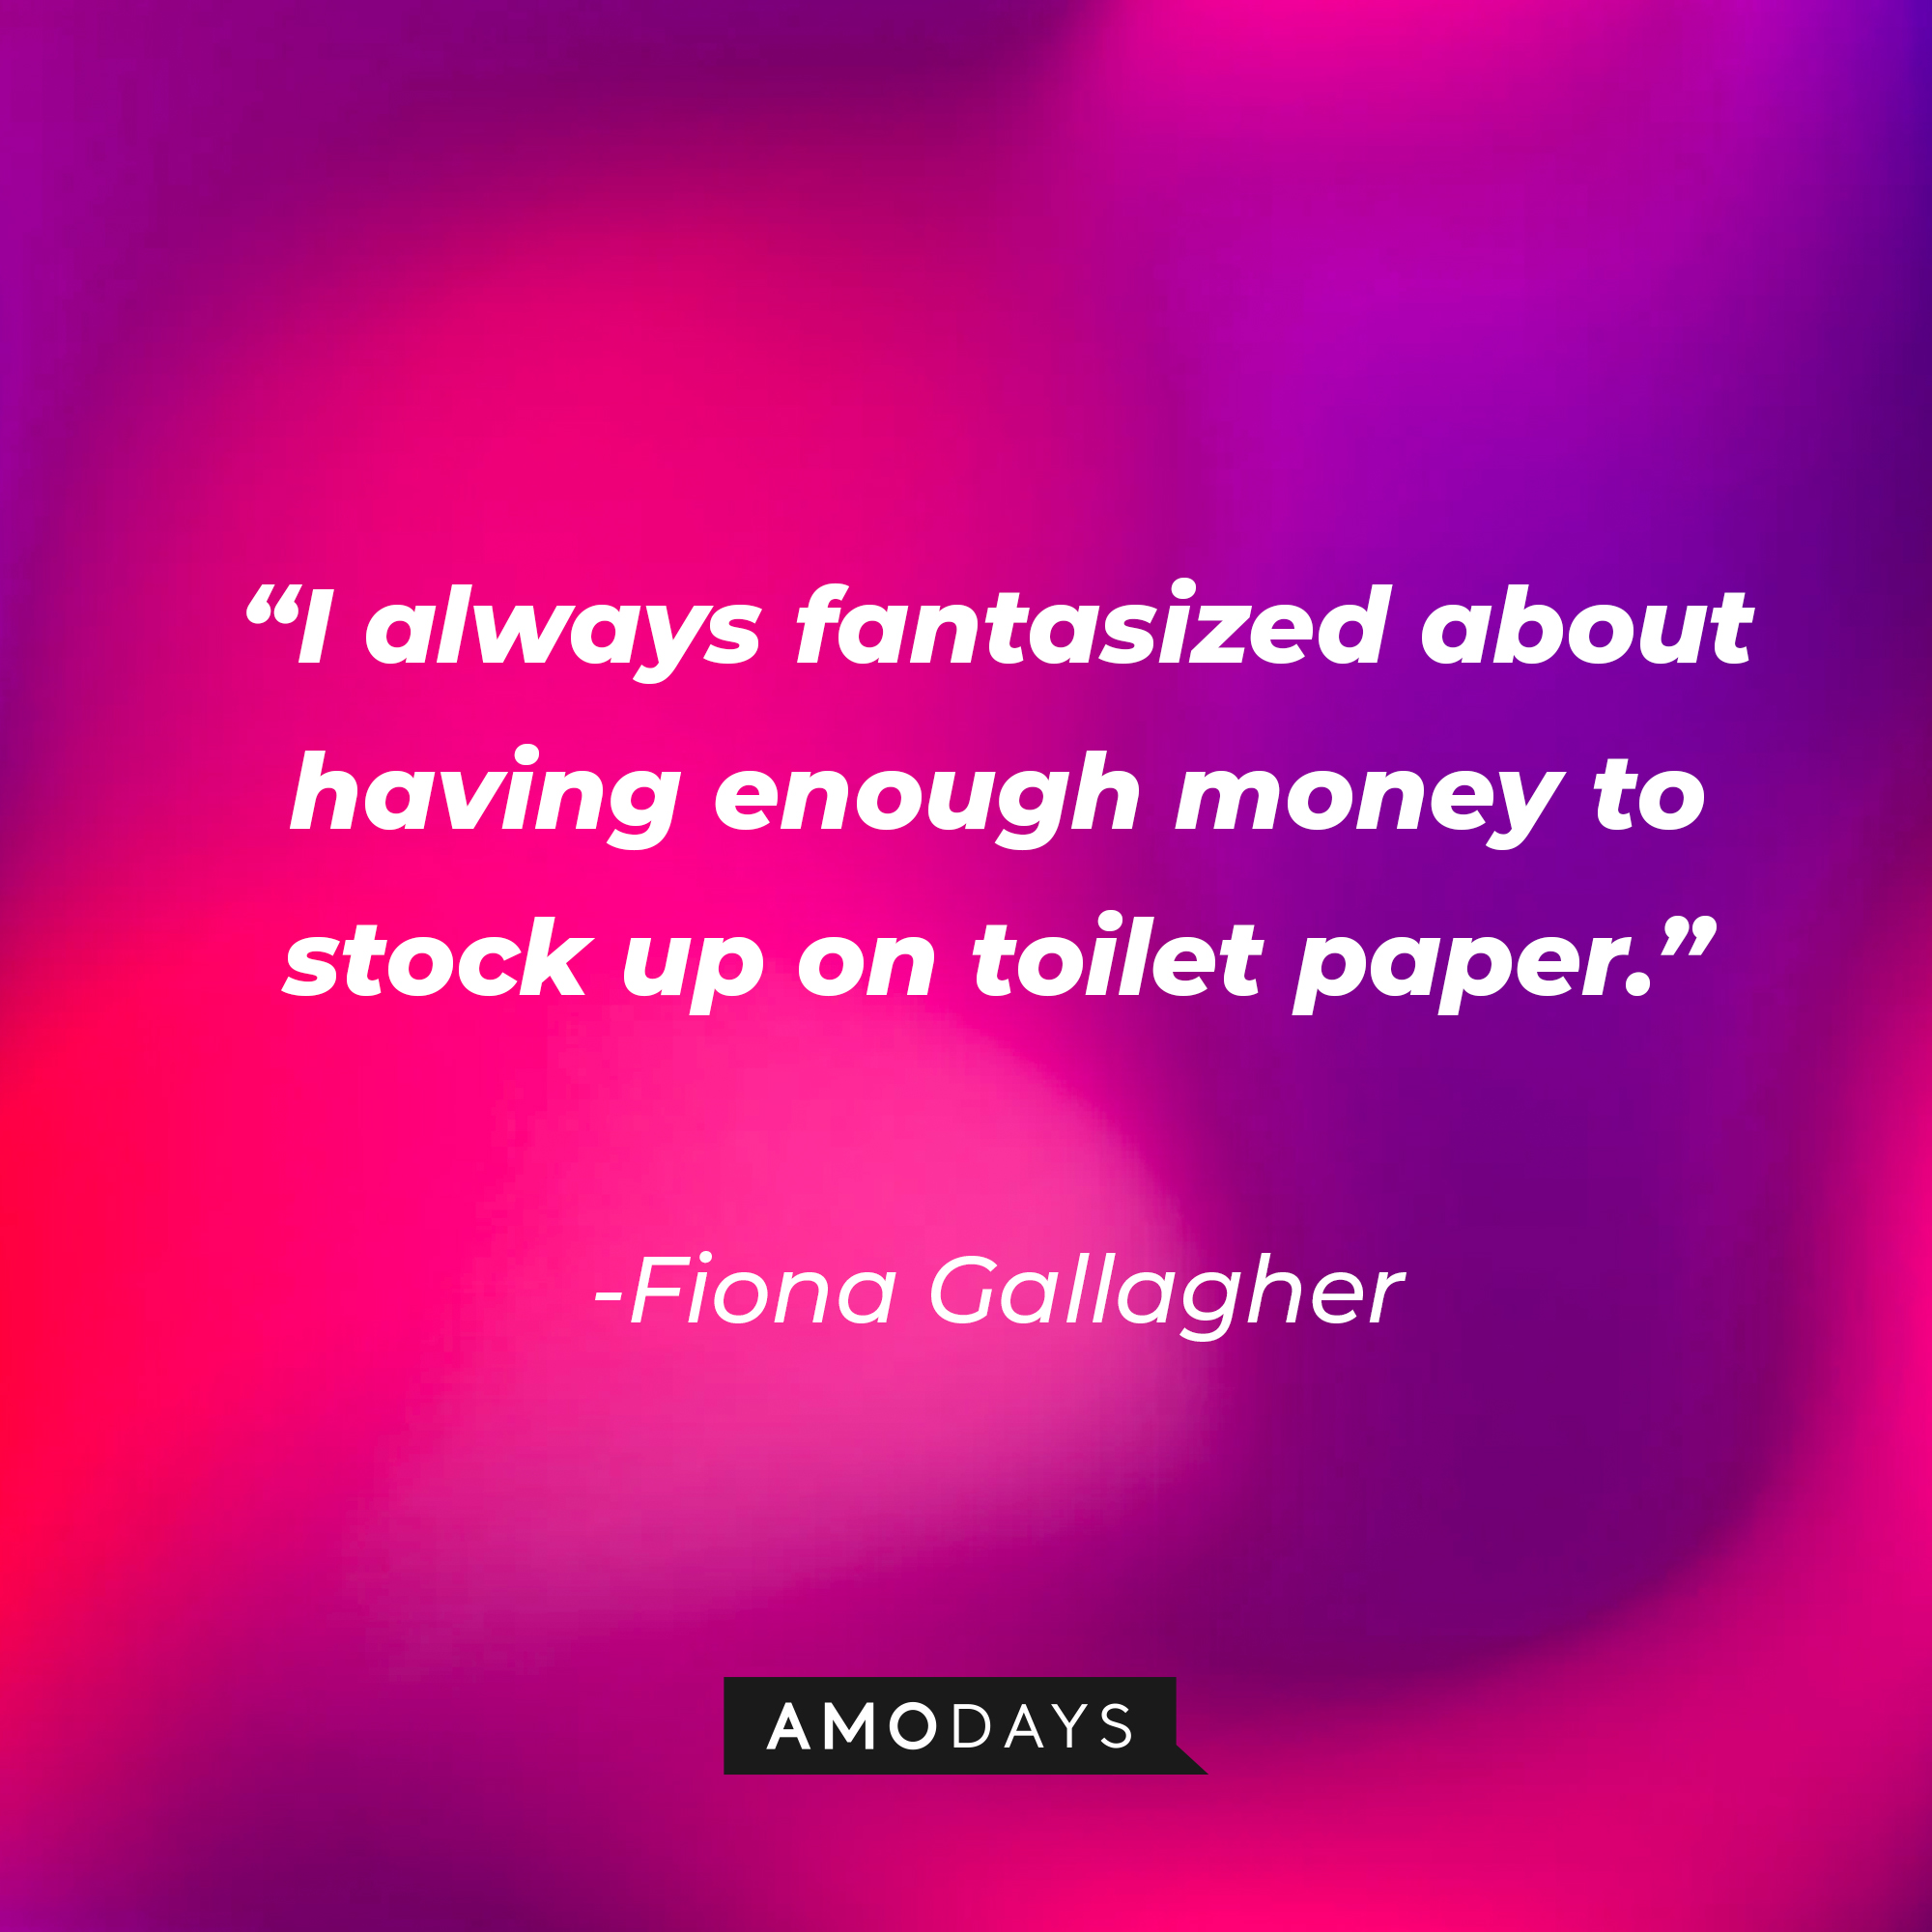 Fiona Gallagher’s quote: “I always fantasized about having enough money to stock up on toilet paper.” | Source: AmoDays